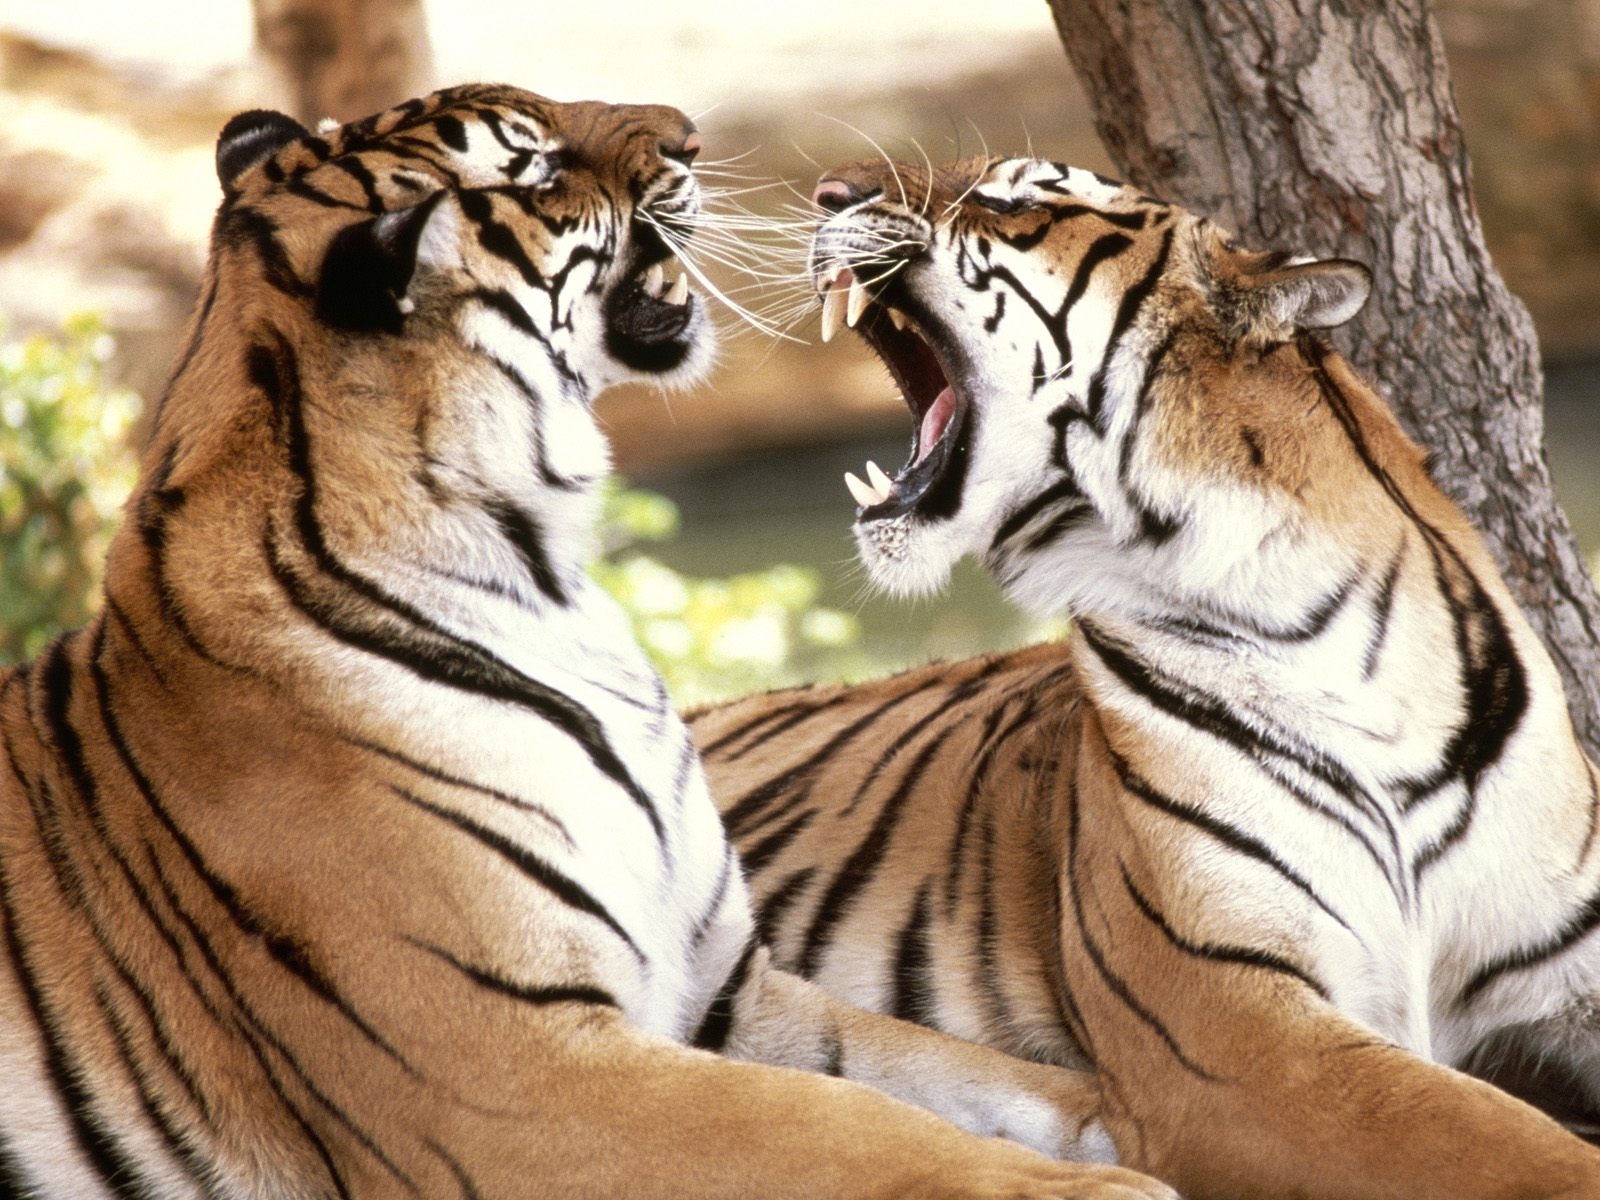 100 Dangerous Tigers Wallpapers - Hottest Pictures 